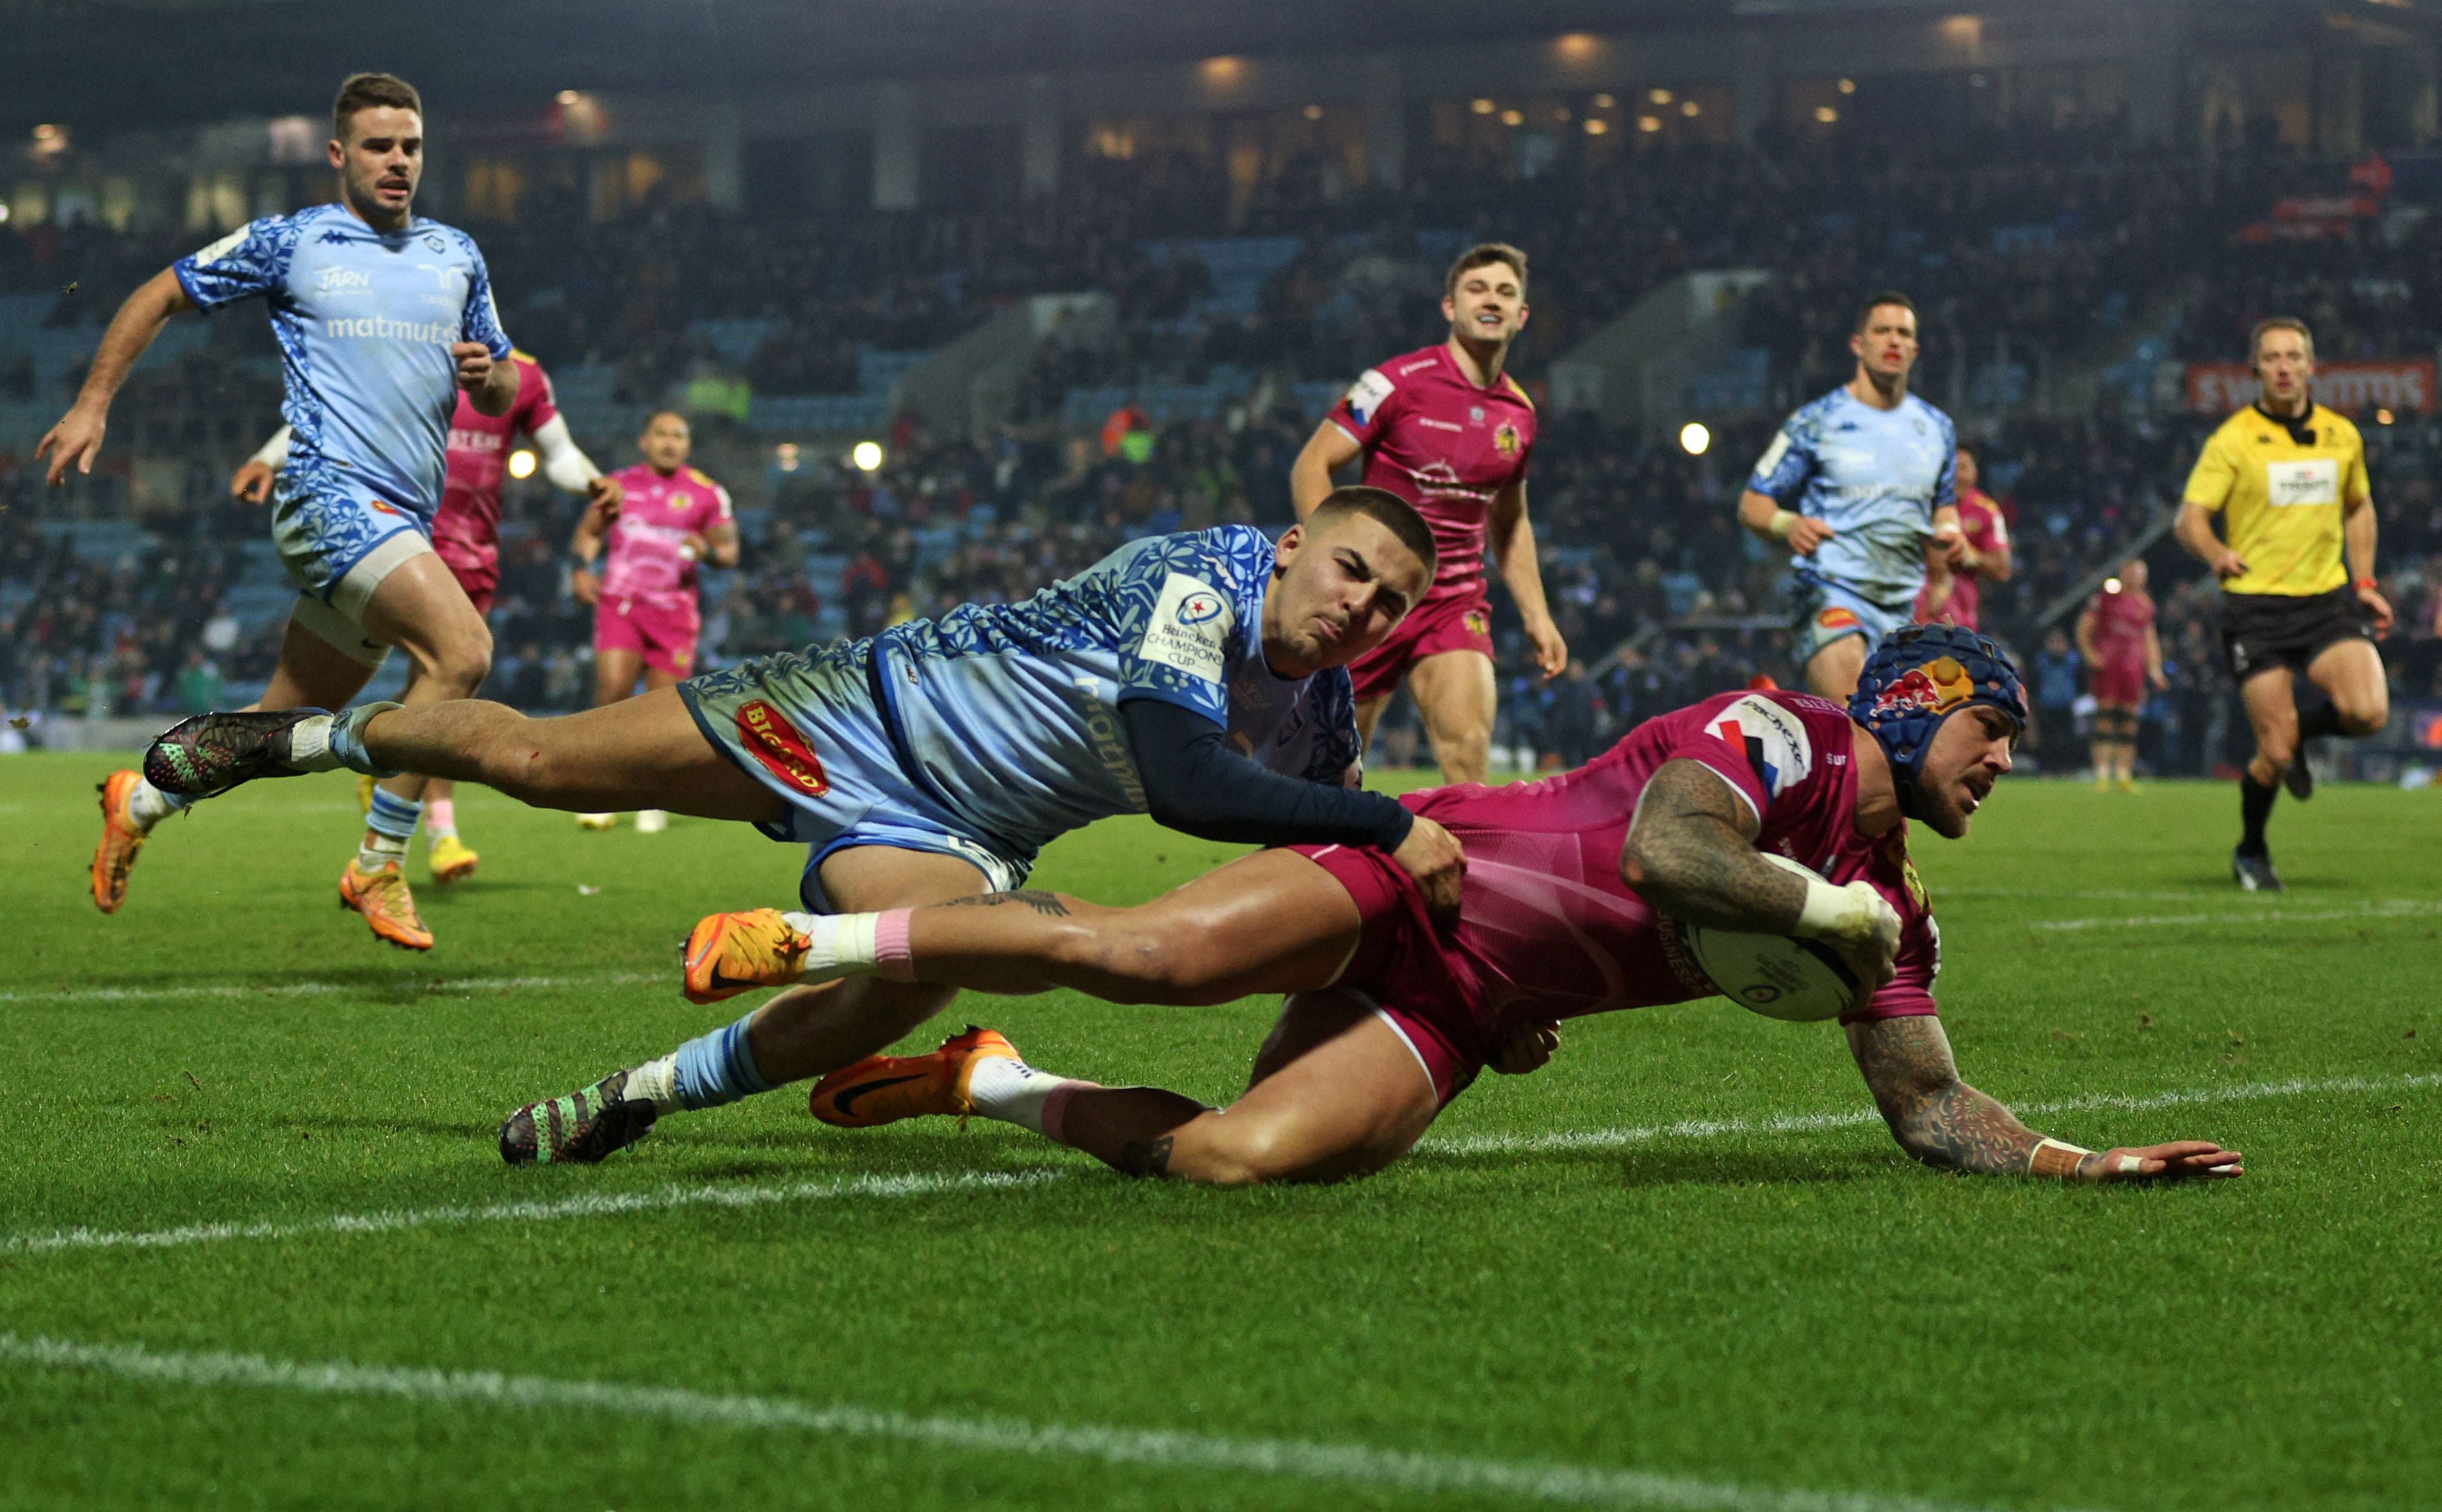 Jack Nowell was among the try-scorers